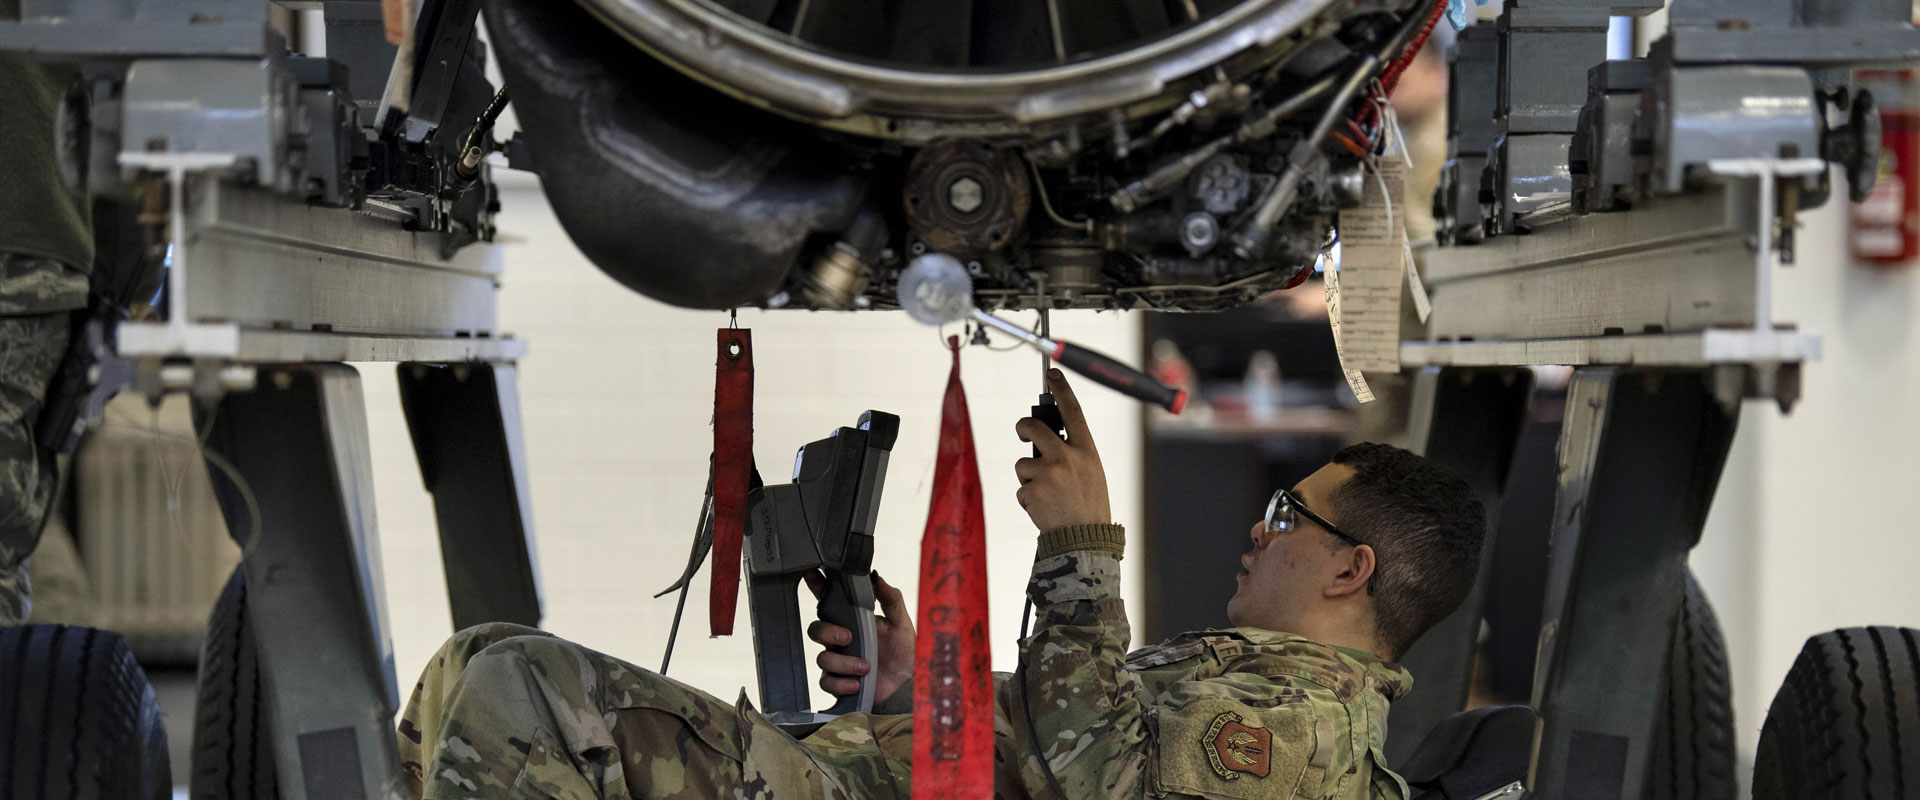 Careers for Air Force Avionics Technicians through Orion Talent